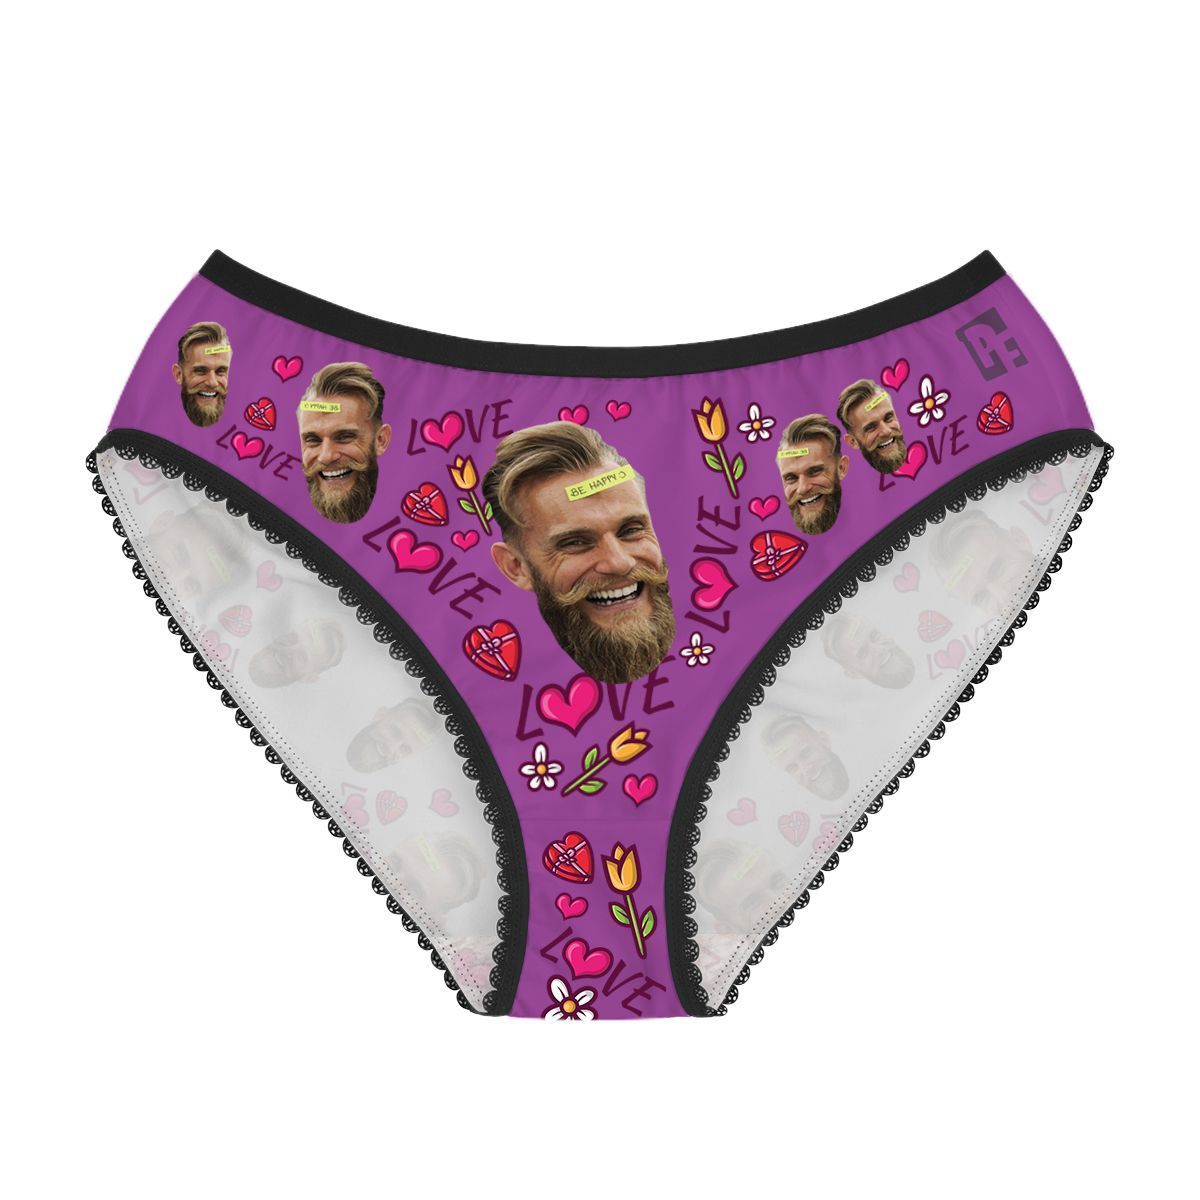 Purple Hearts and Flowers women's underwear briefs personalized with photo printed on them